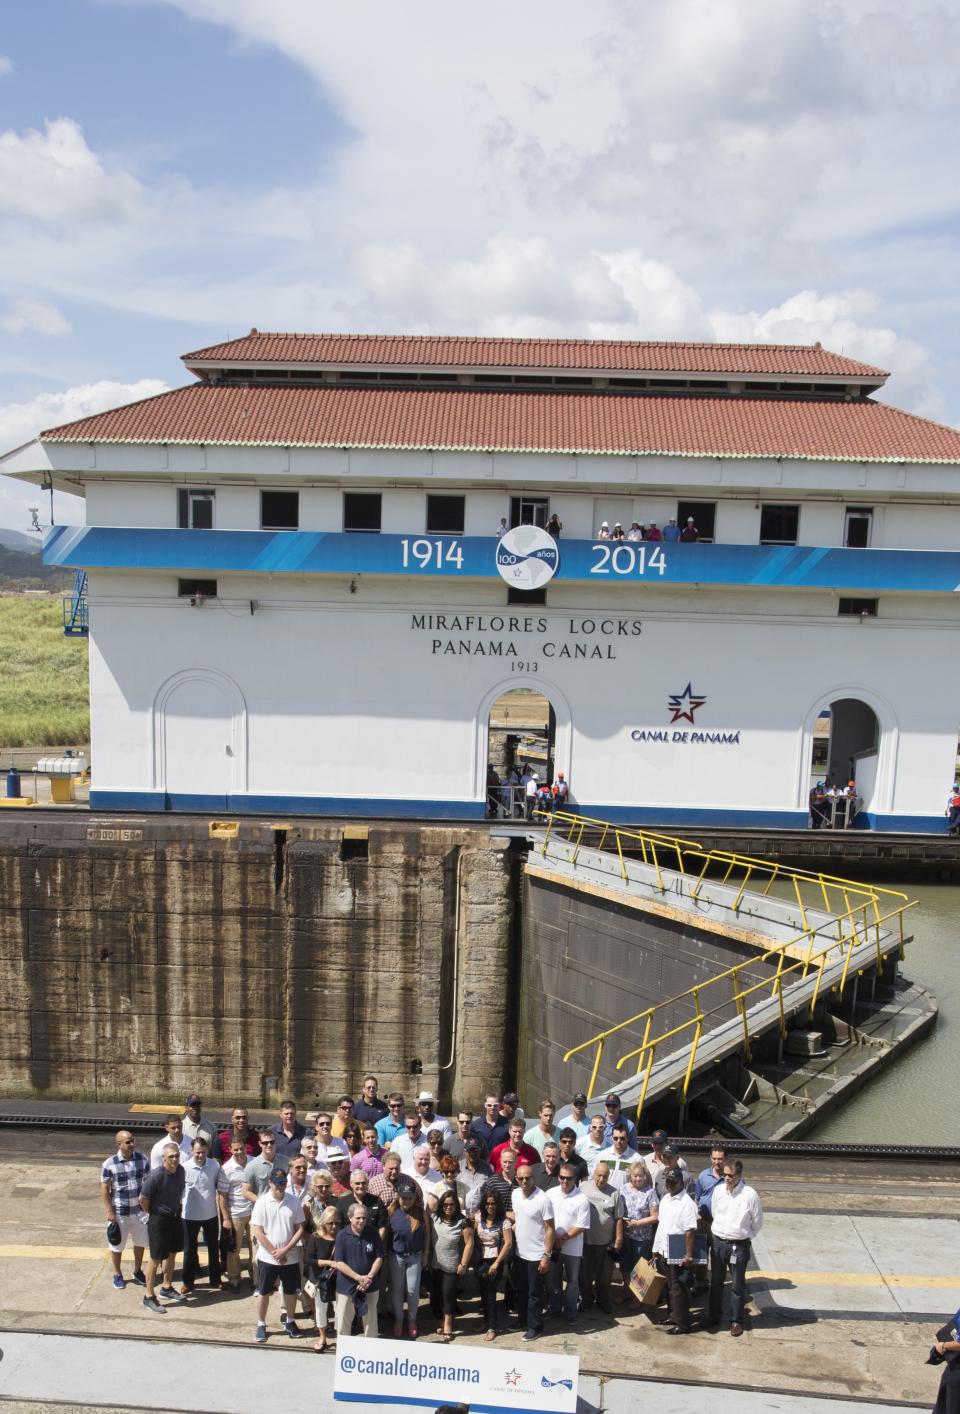 New York Yankees baseball players, staff members and companions pose for a photo during a visit to the Miraflores Locks at the Panama Canal in Panama City, Friday, March 14, 2014. The New York Yankees and the Miami Marlins will play on March 15-16, in the "Legend Series" to honor recently retired Yankees pitcher Mariano Rivera. (AP Photo/Tito Herrera)